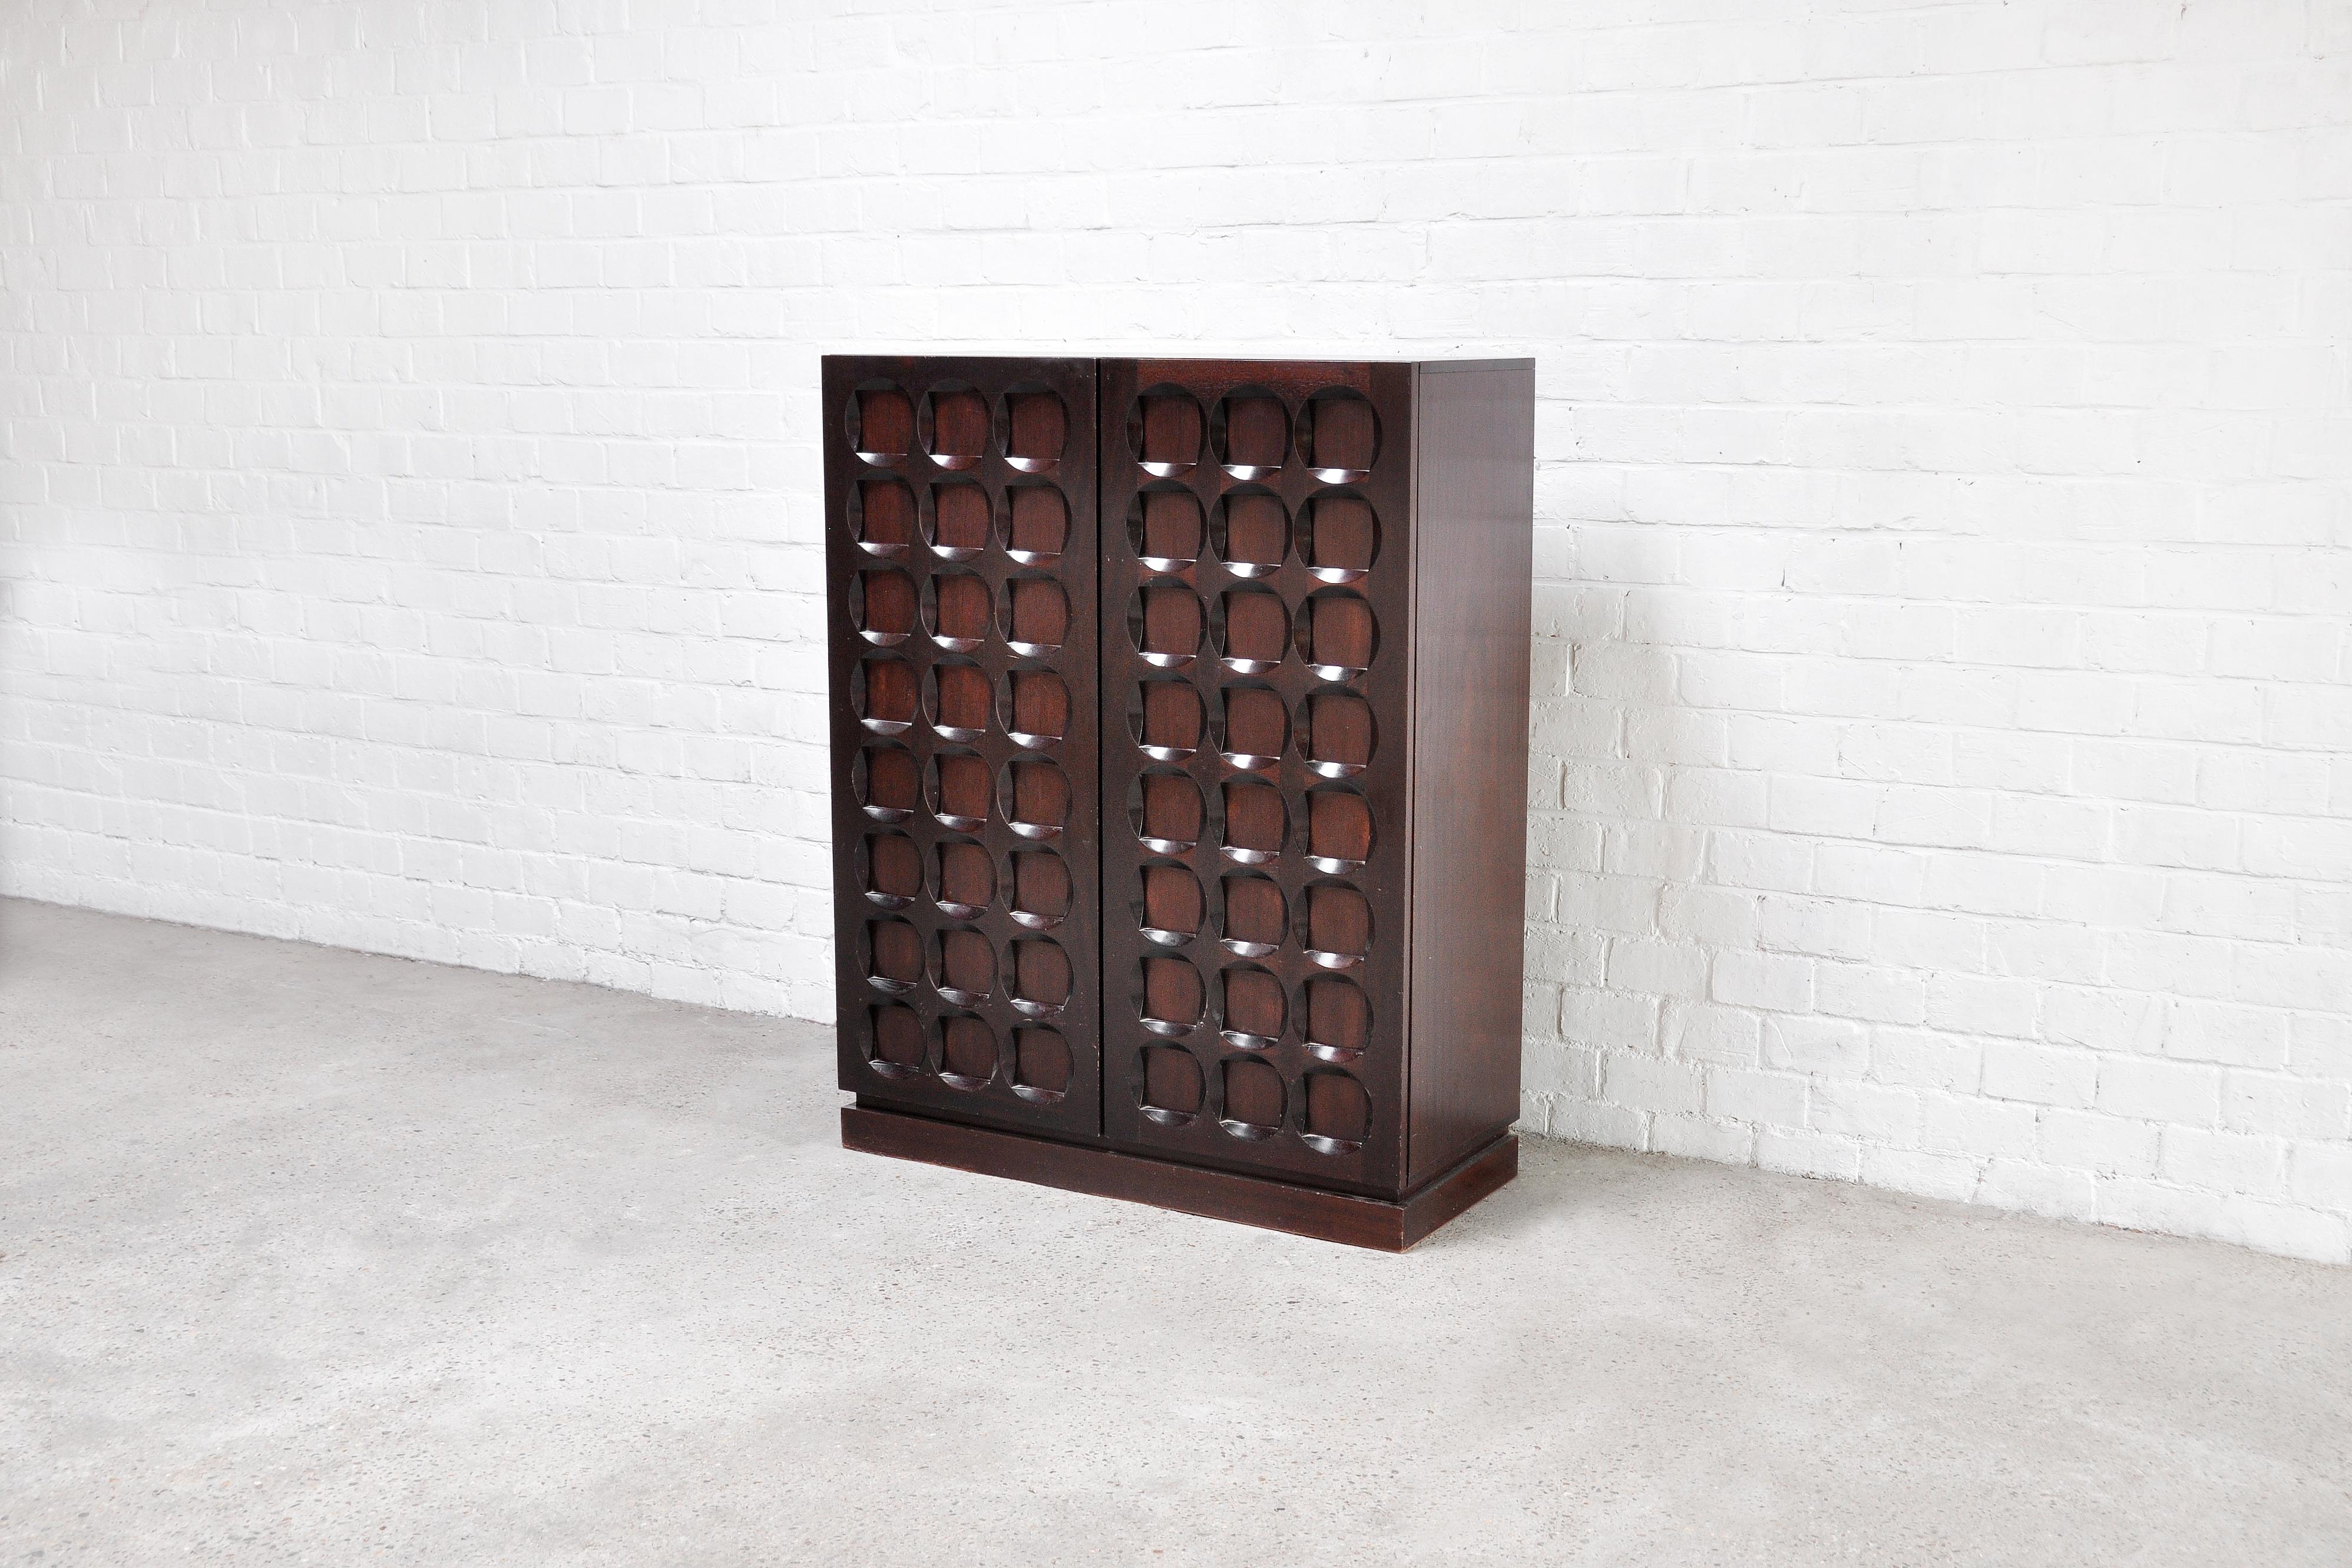 A stunning dark brown brutalist/modernist bar cabinet with graphical doors. The continuous pattern gives this sideboard a strong and eye catching expression. Shows amazing woodwork on the two-door panels. The oak wood is stained into a dark brown